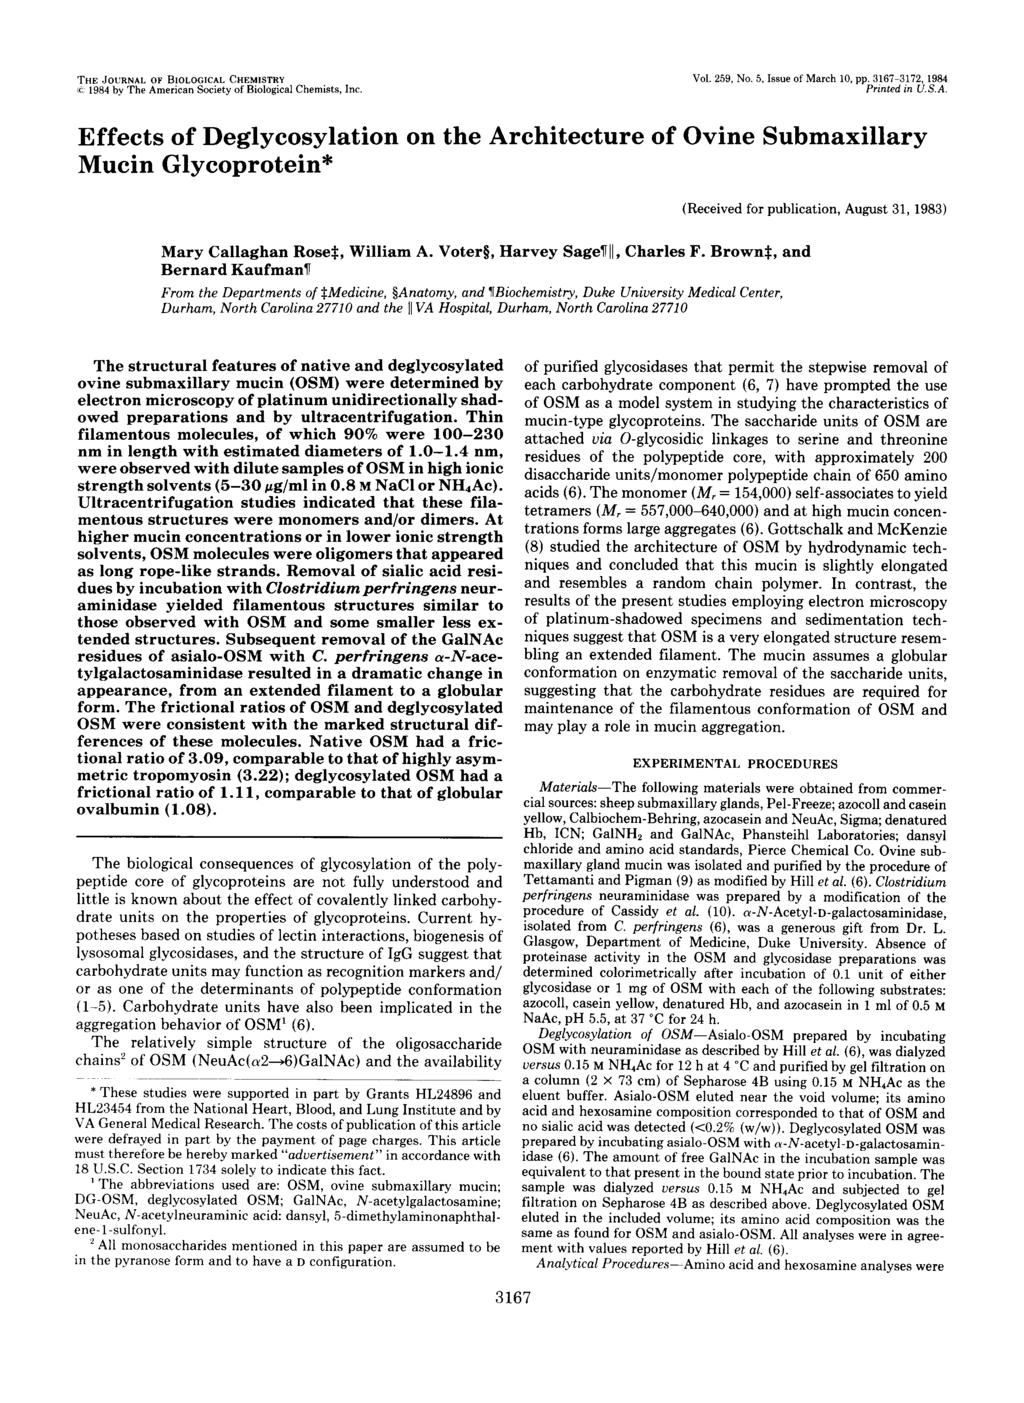 ~ ~ ~ ~~~~~~~ ~ THE JOURNAL OF BIOLOGICAL CHEMISTRY L 1984 by The American Society of Biologlcal Chemists, Inc Vol 259, No 5, Issue of March 10, pp 3167-3172, 1984 Prcnted in USA Effects of